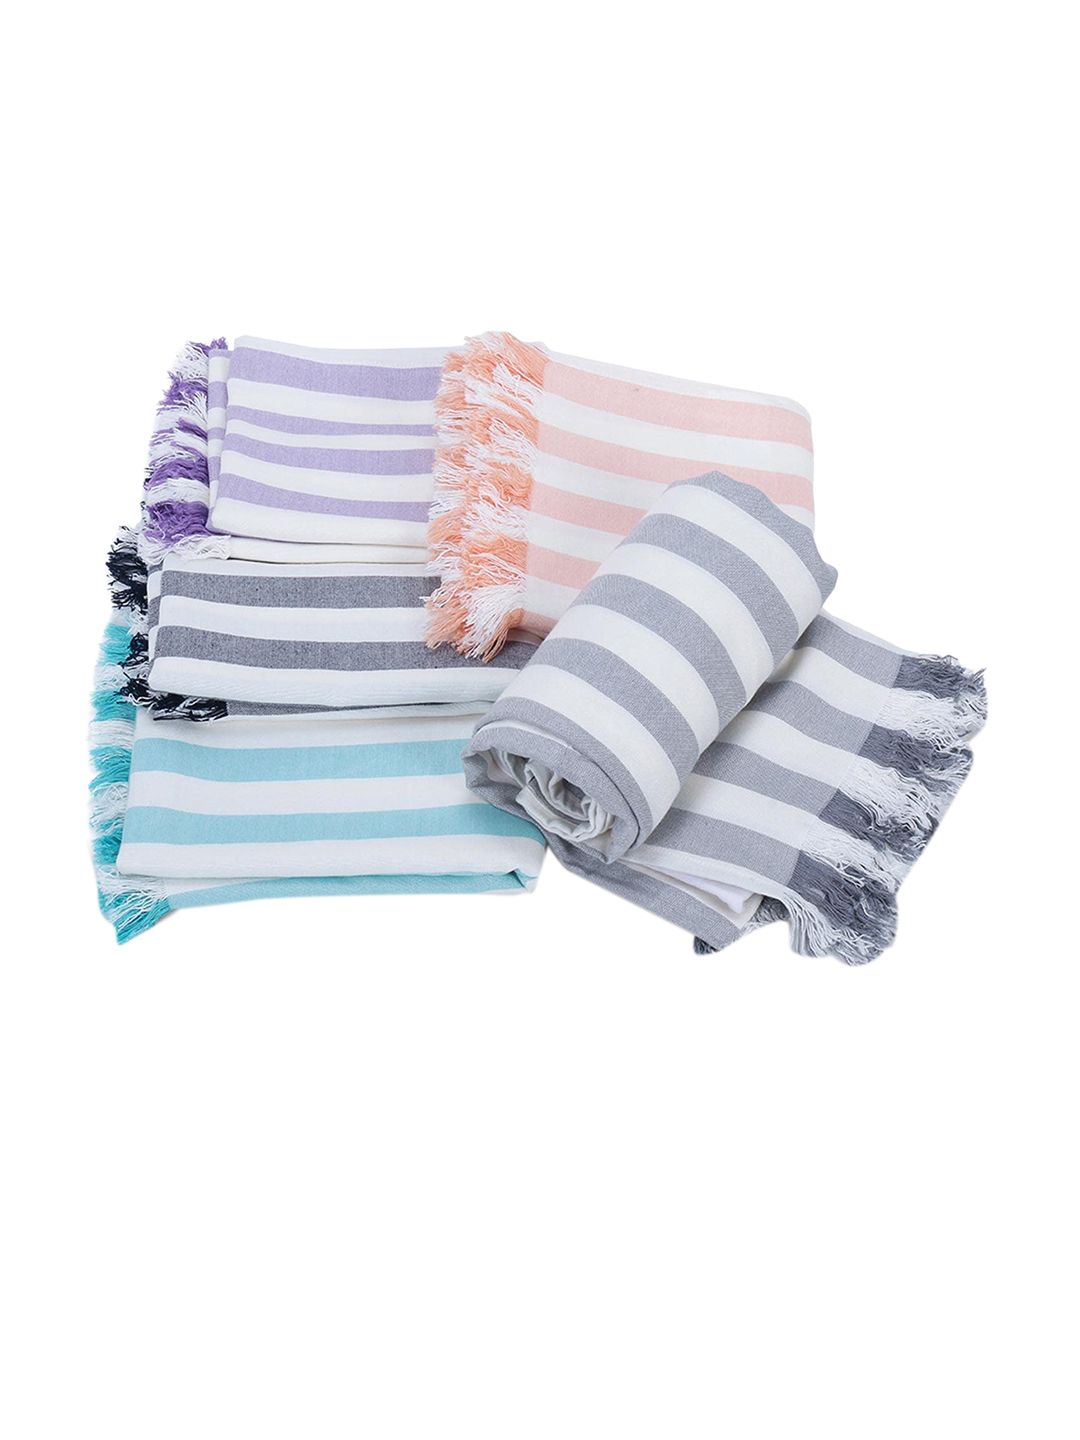 haus & kinder Grey Striped 250 GSM Bamboo Bath Towels Price in India